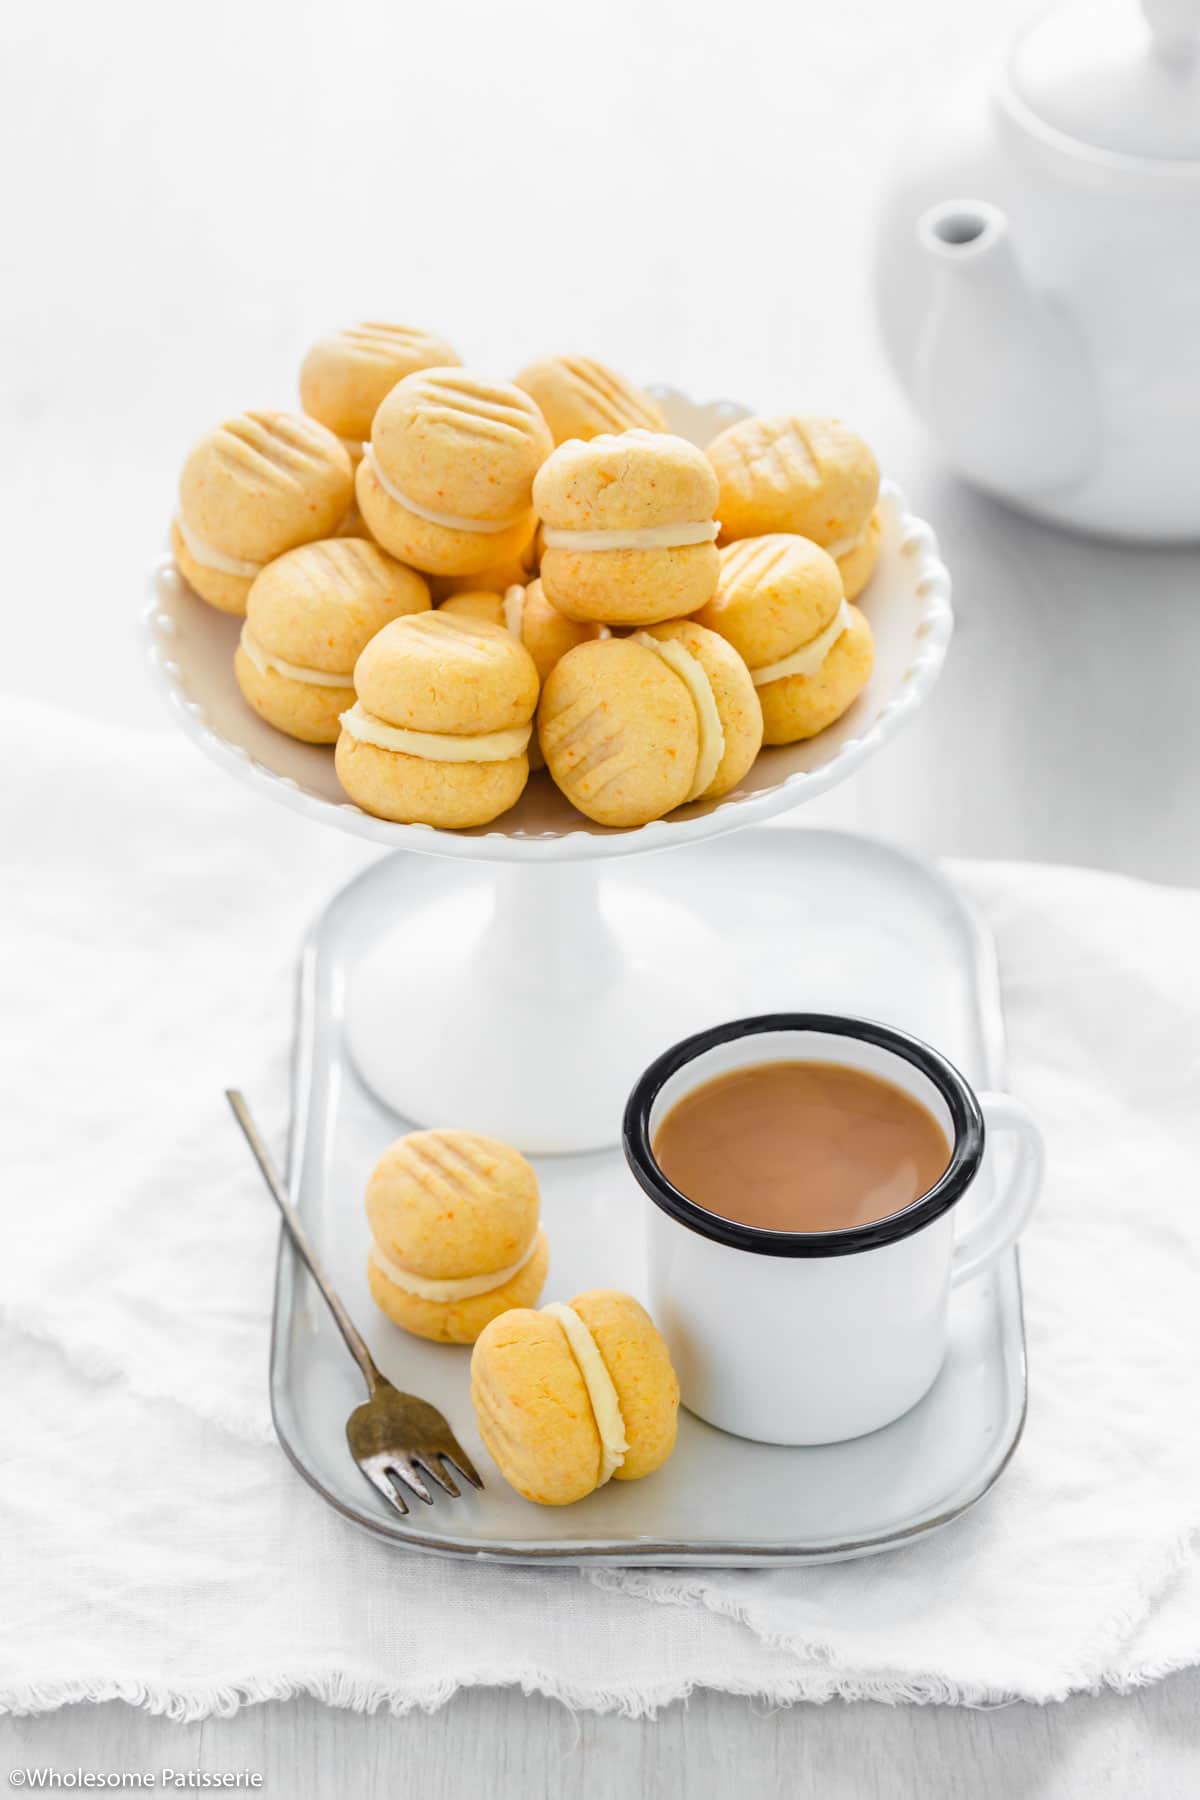 Biscuits together with tea